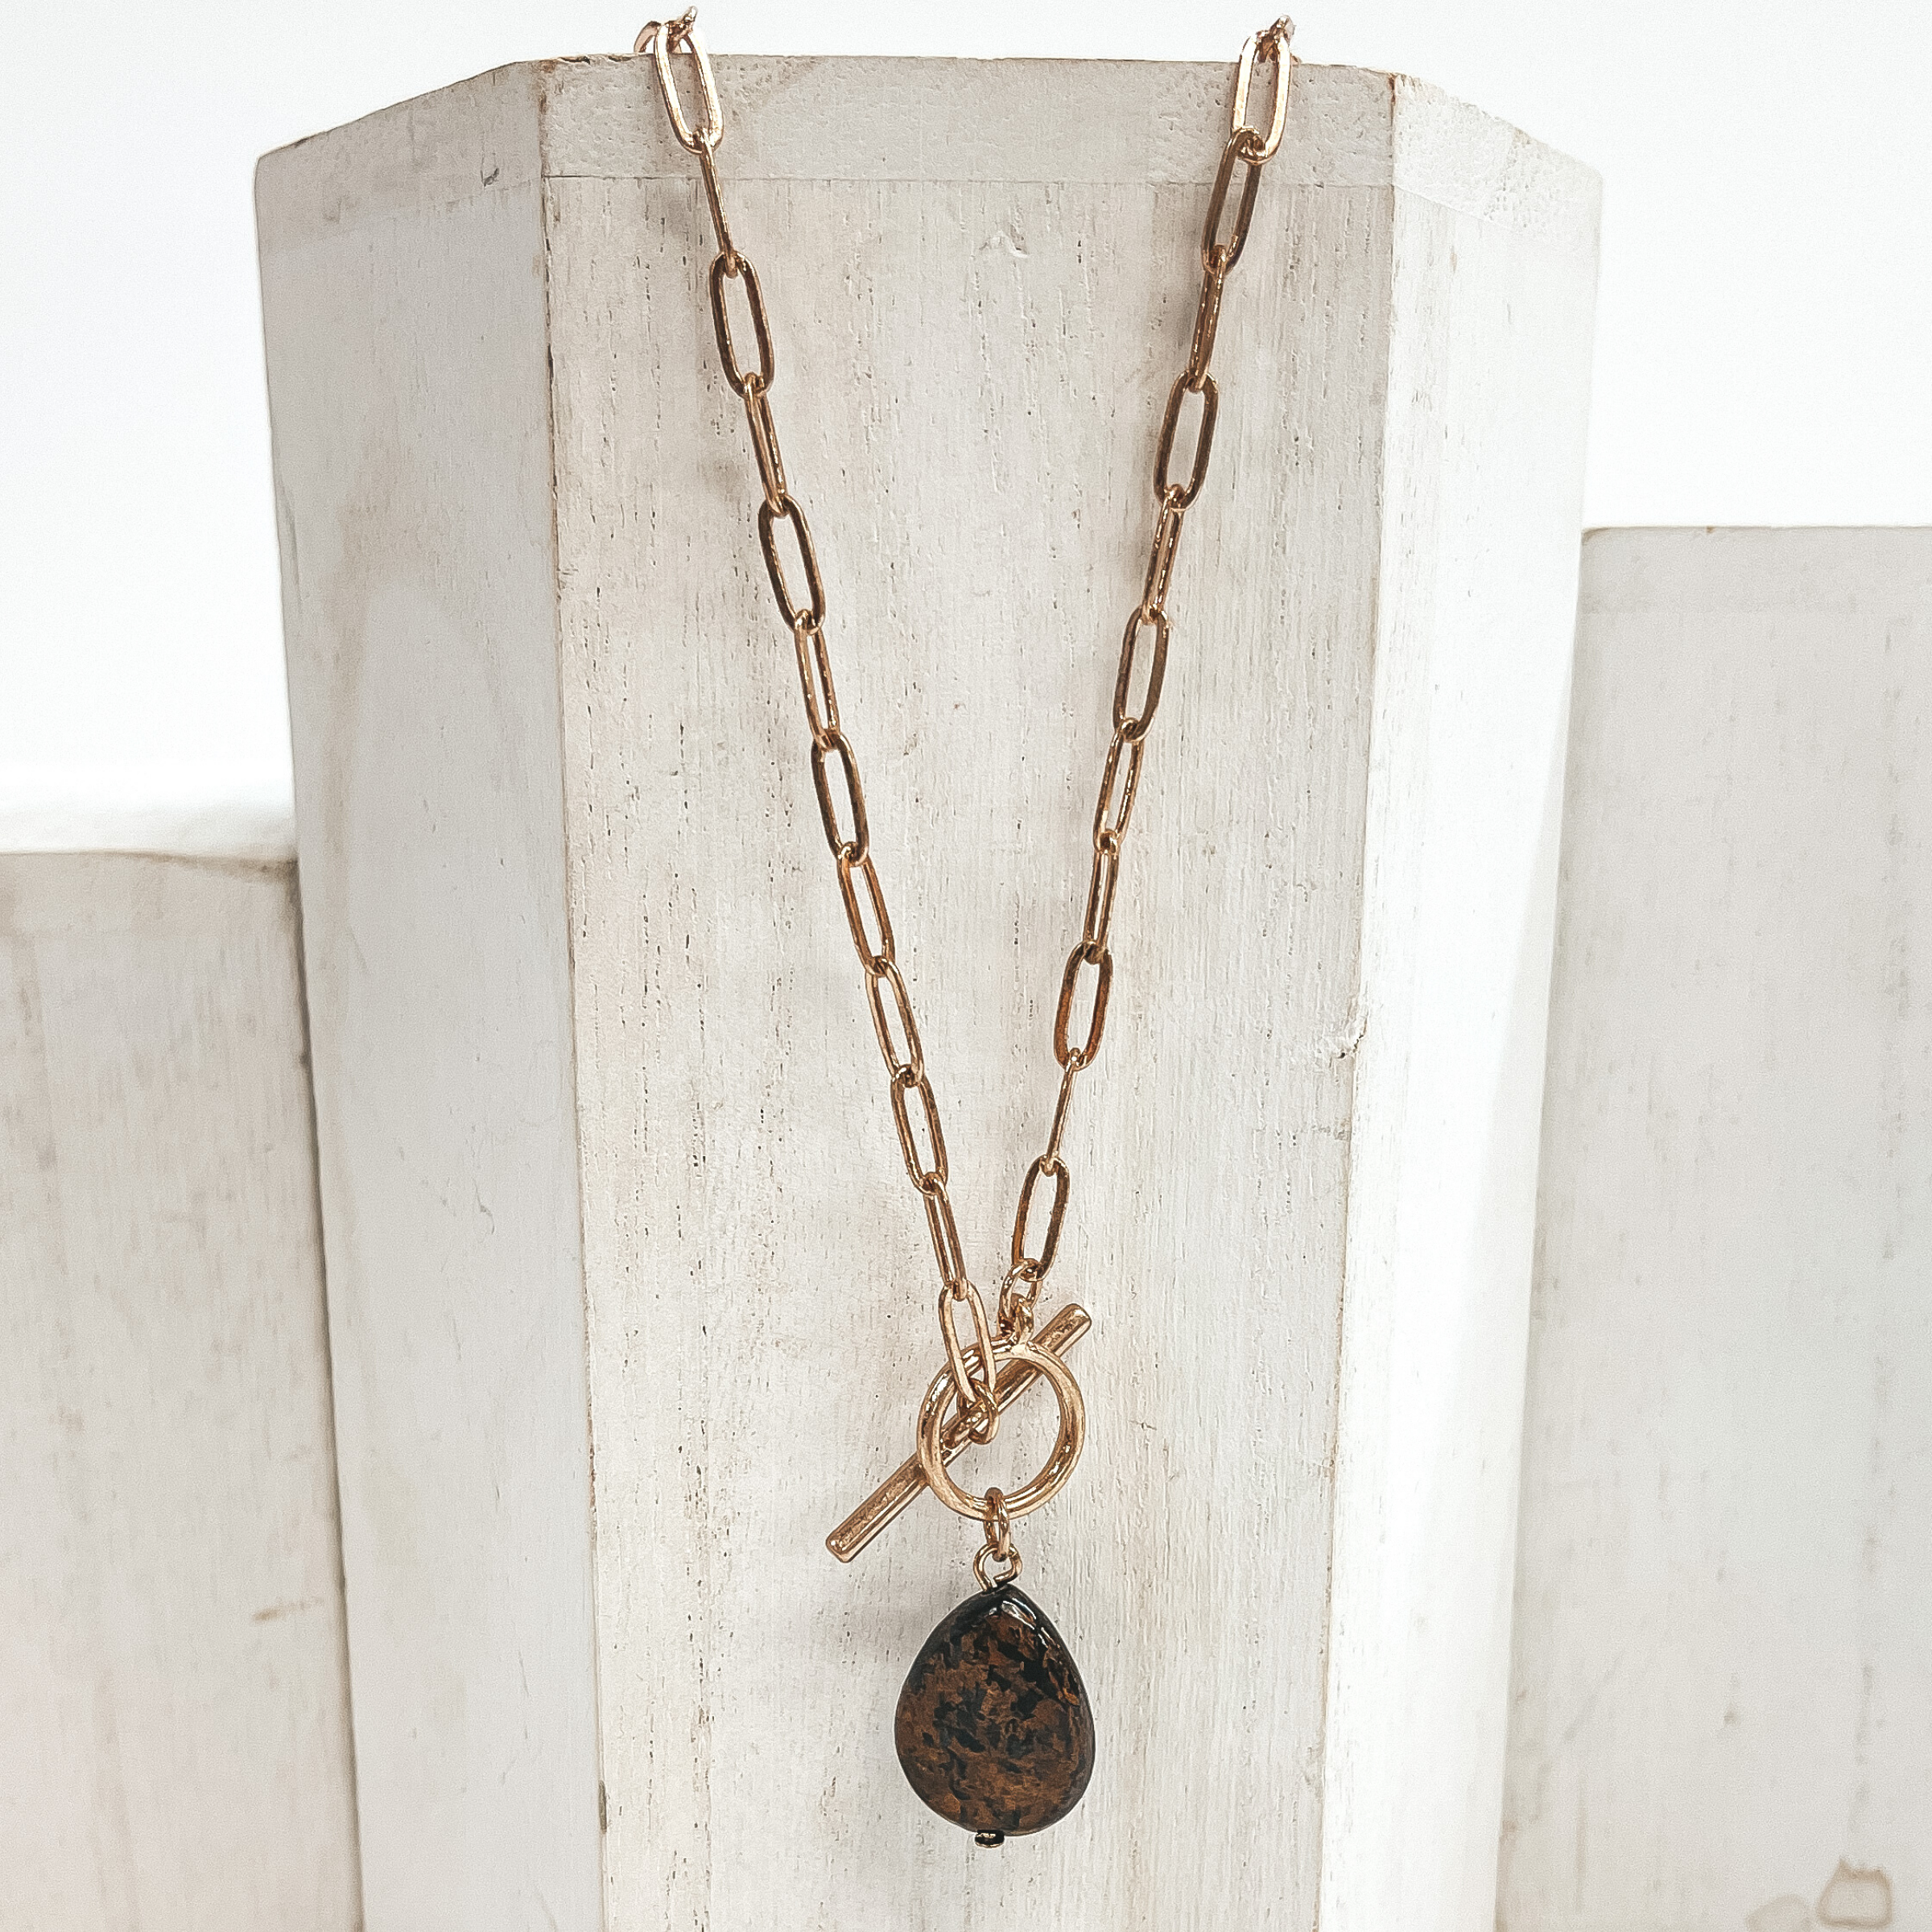 Gold paperclip chain necklace with toggle clasp and  natural stone teardrop pendant in brown. Taken on  a white block and white background.